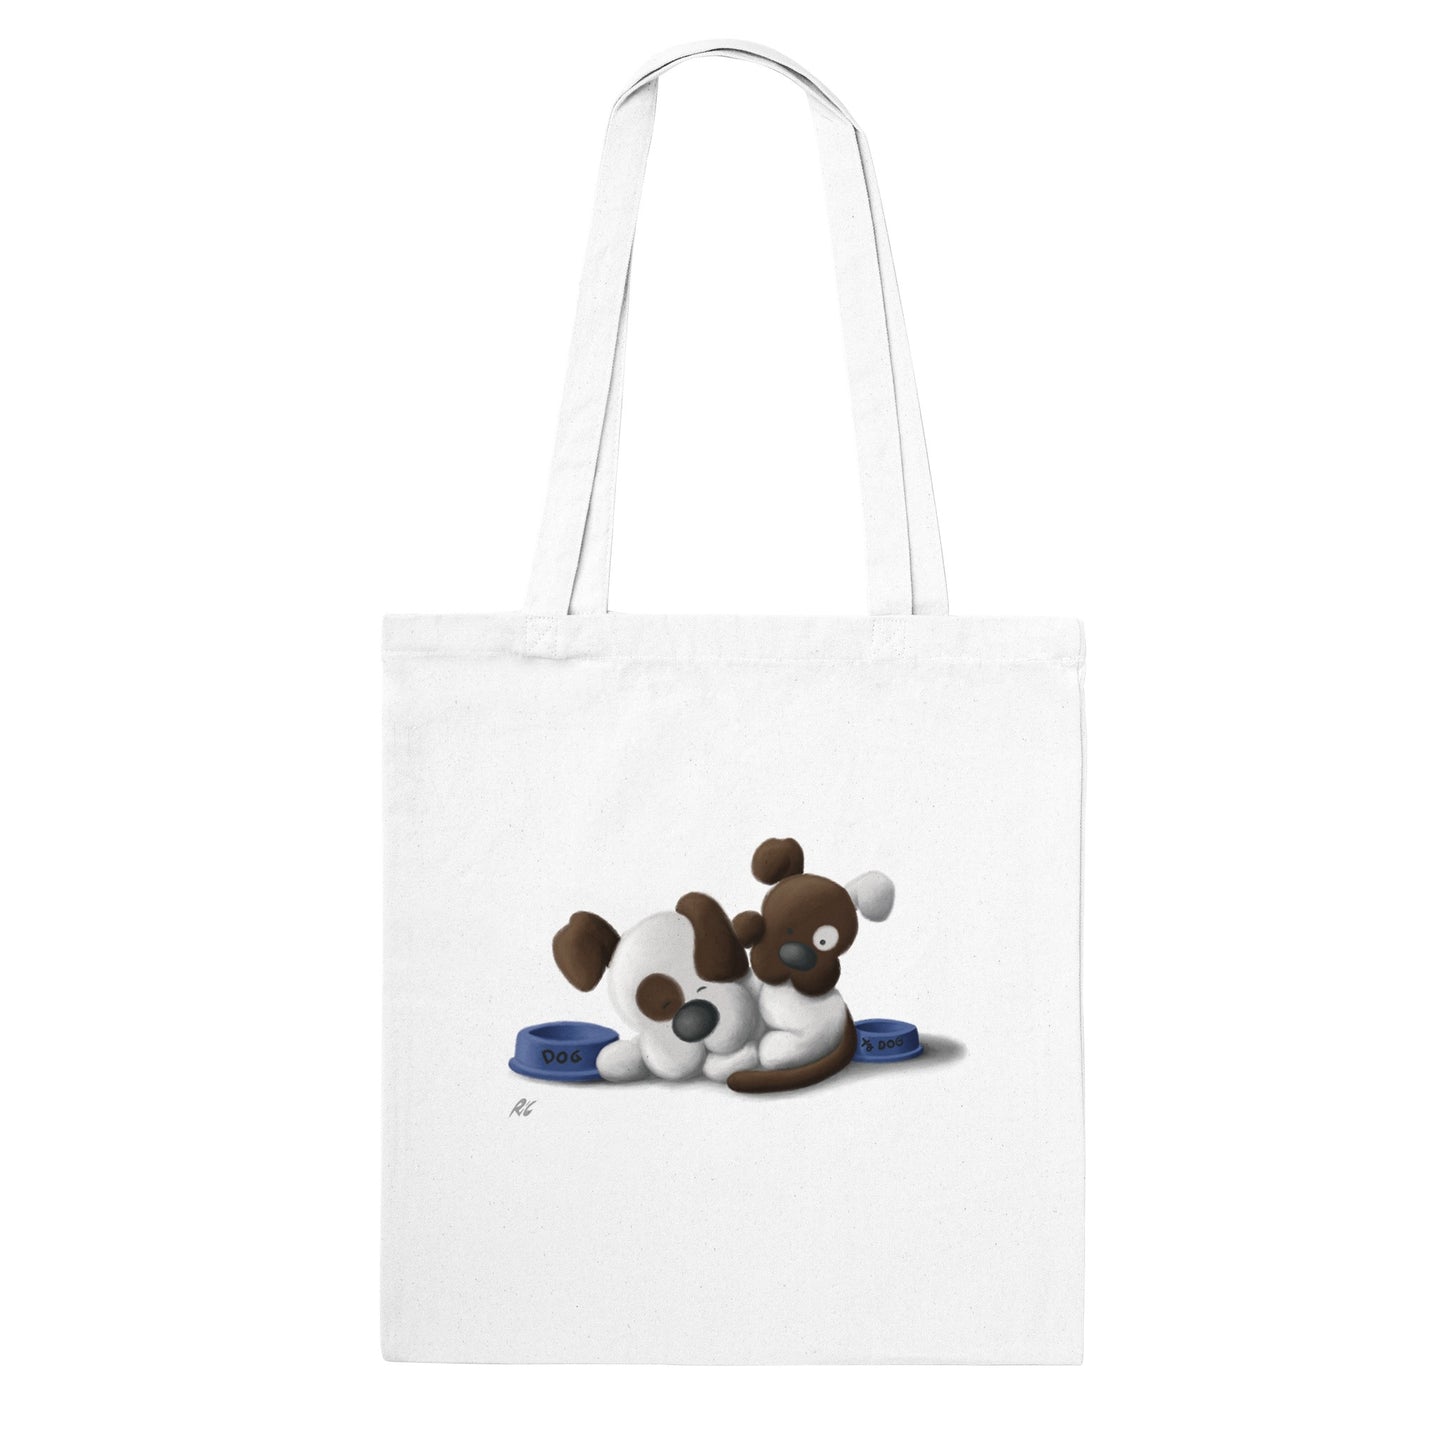 "Wake up Dad, it's time for Dinner!" - Classic Tote Bag (5 colour choices)